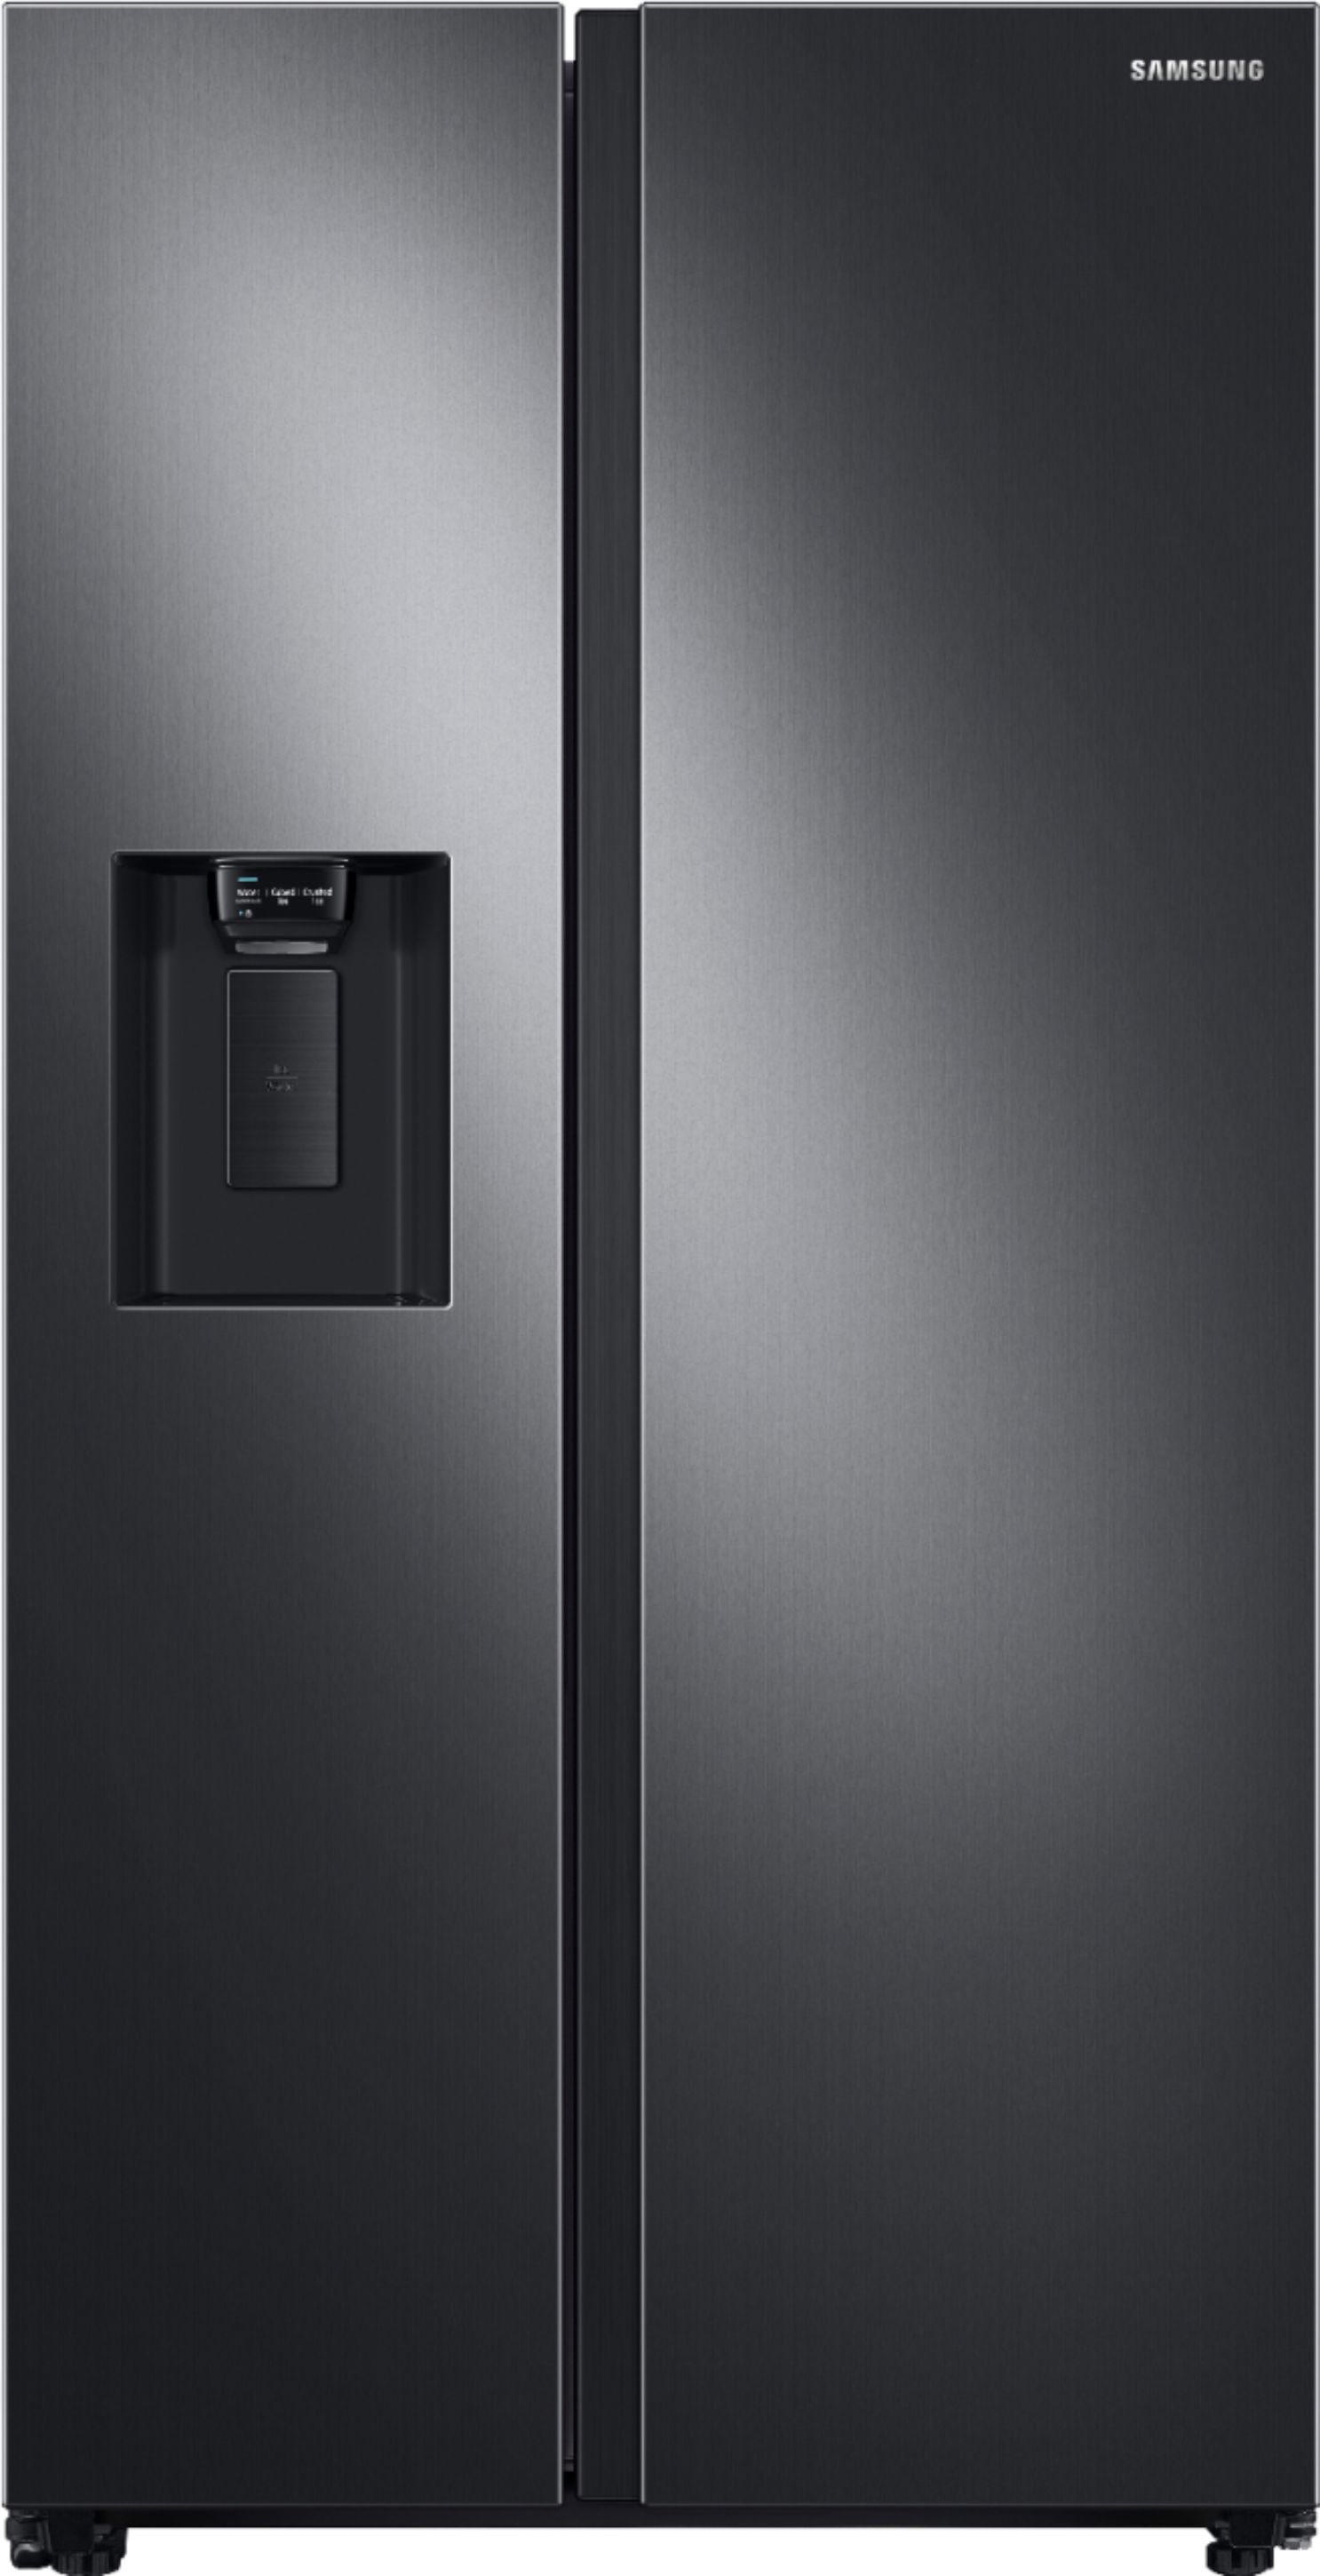 Samsung 27.4 cu. ft. Side-by-Side Refrigerator with Large Capacity Black  Stainless Steel RS27T5200SG/AA - Best Buy